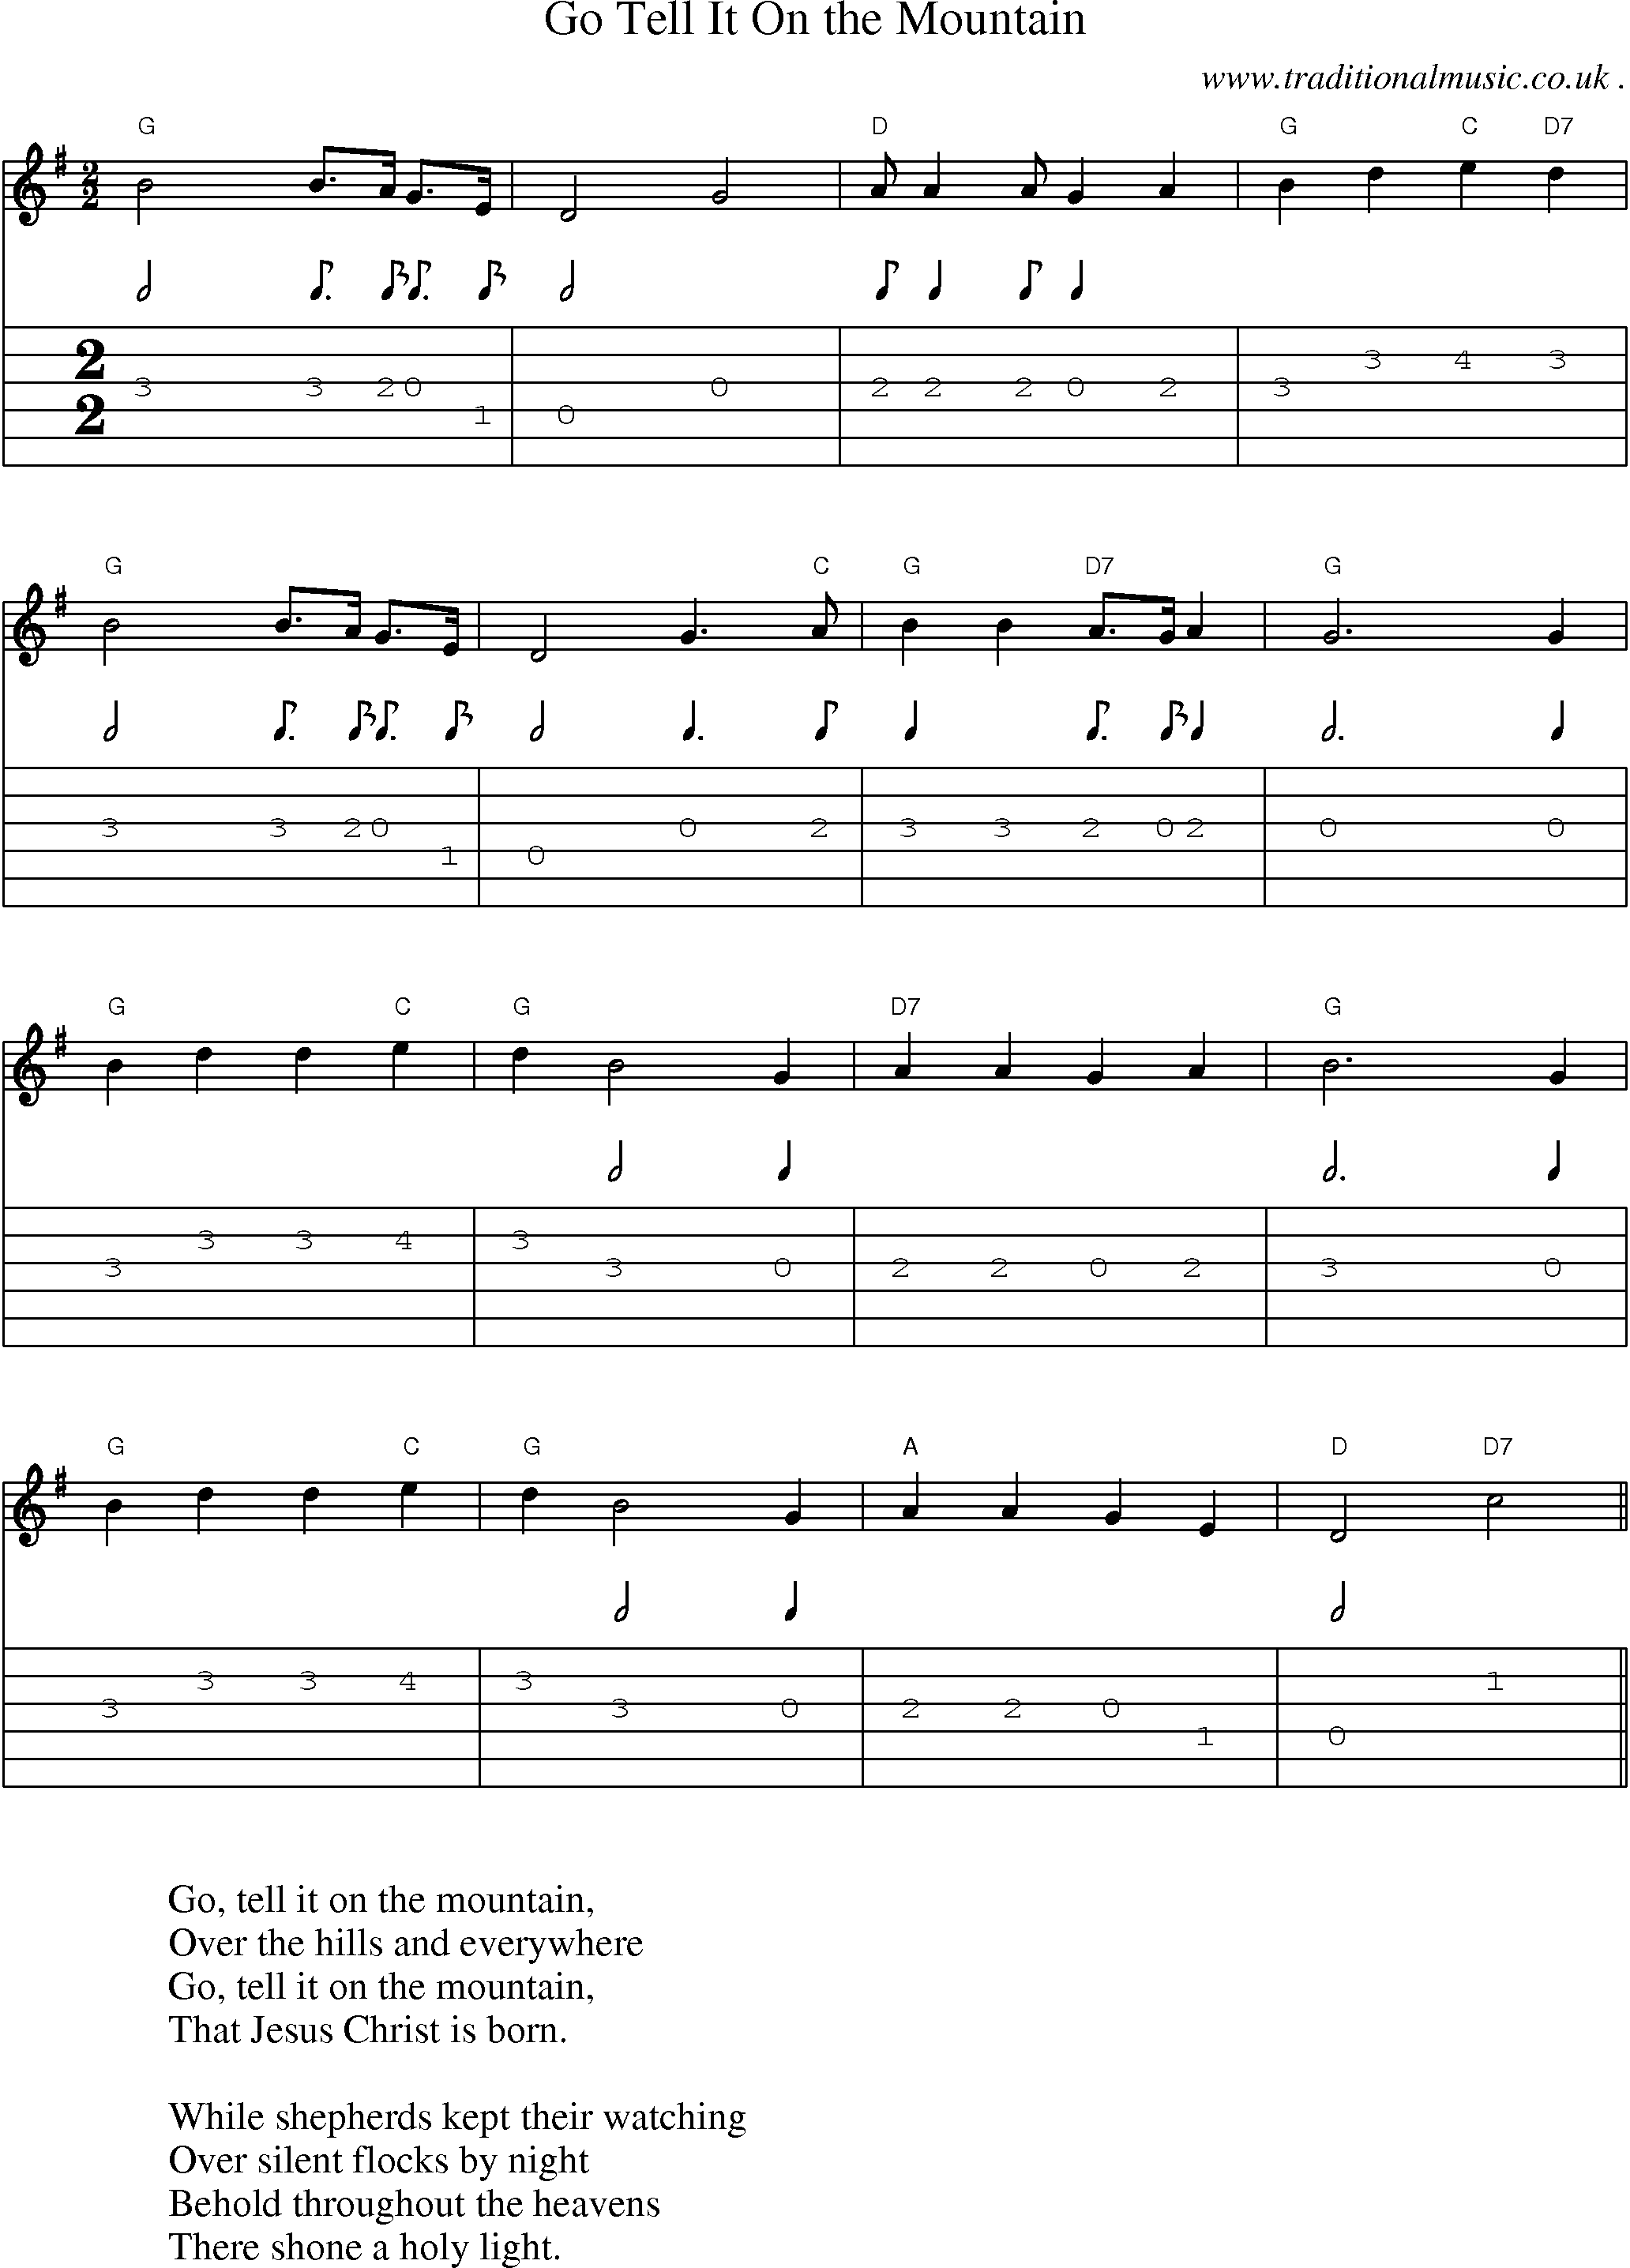 Music Score and Guitar Tabs for Go Tell It On the Mountain